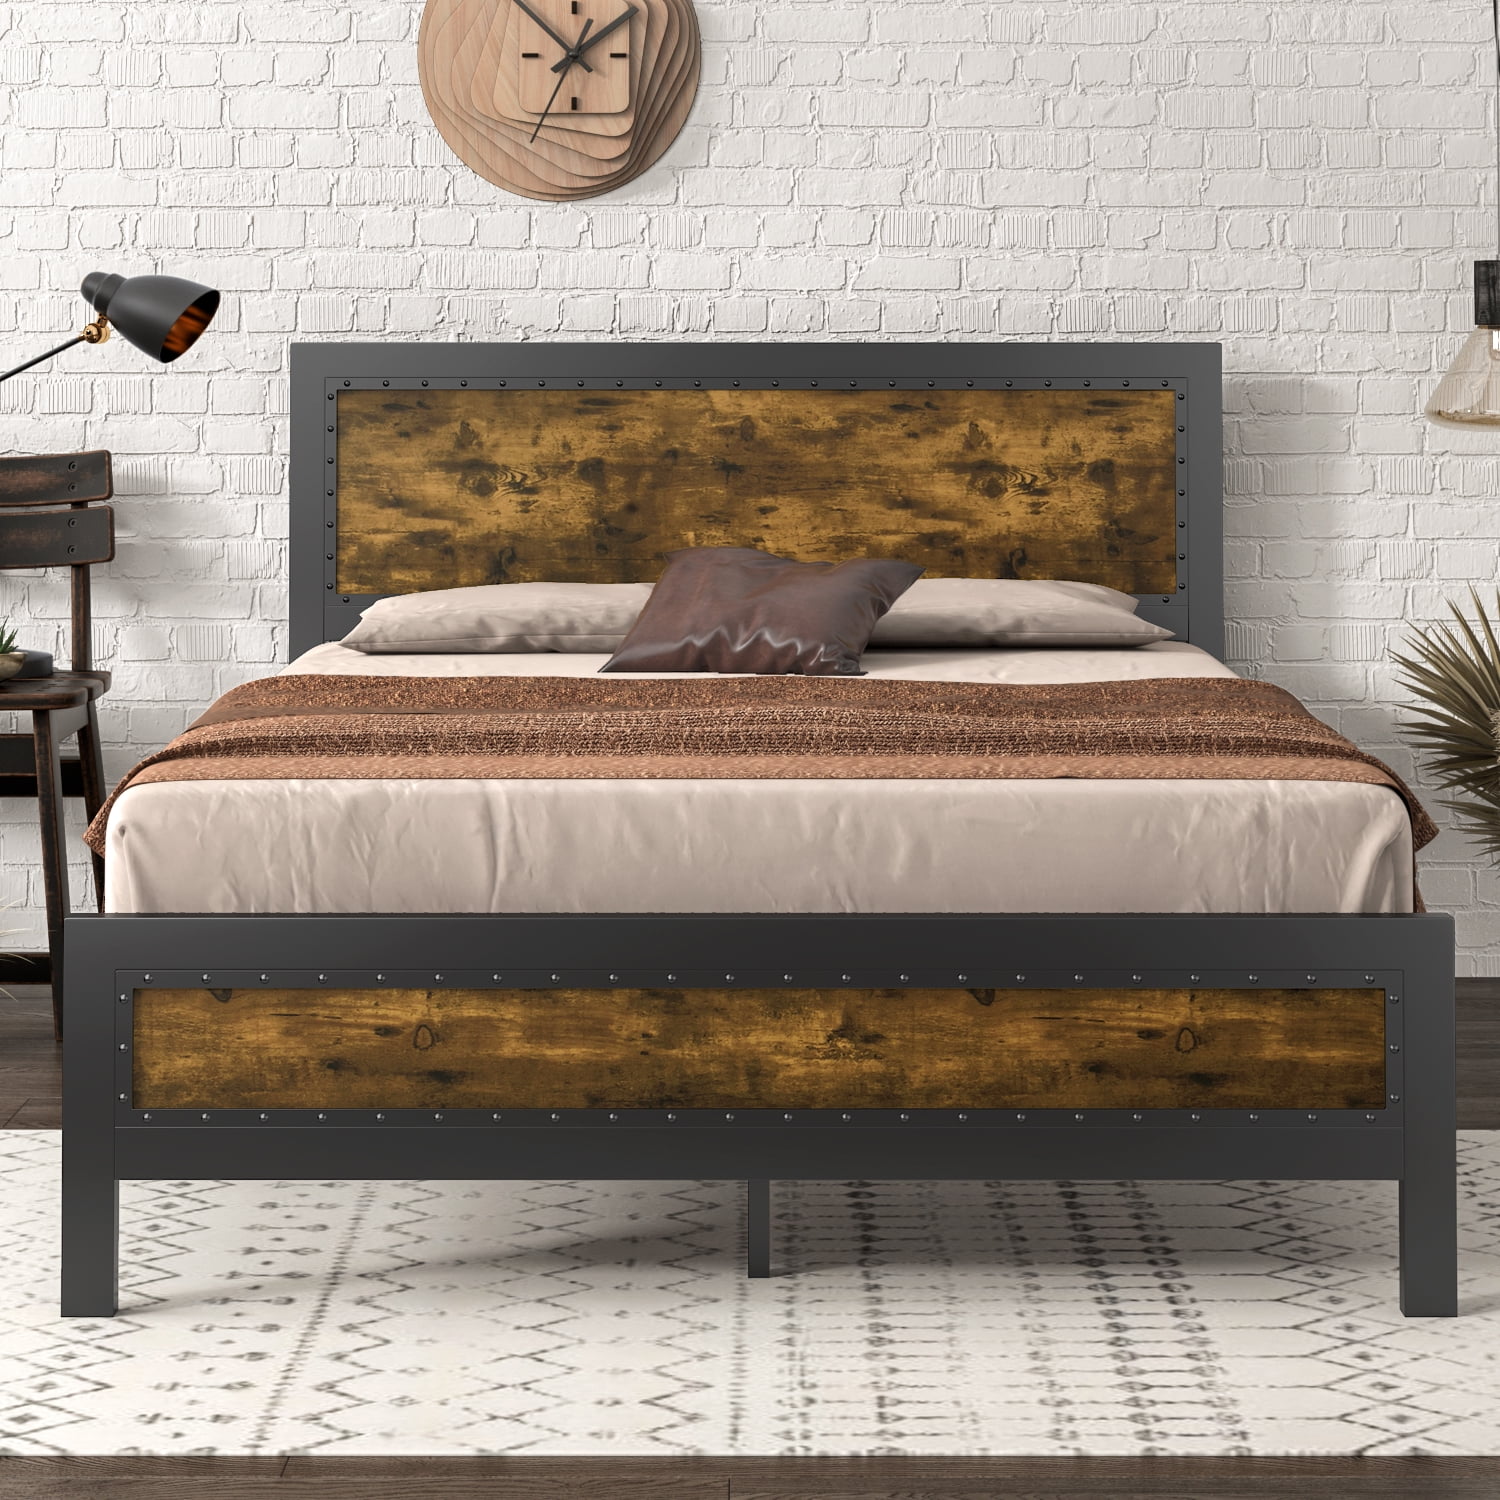 Metal Platform Bed Frame, How To Build A Headboard For Full Size Bed